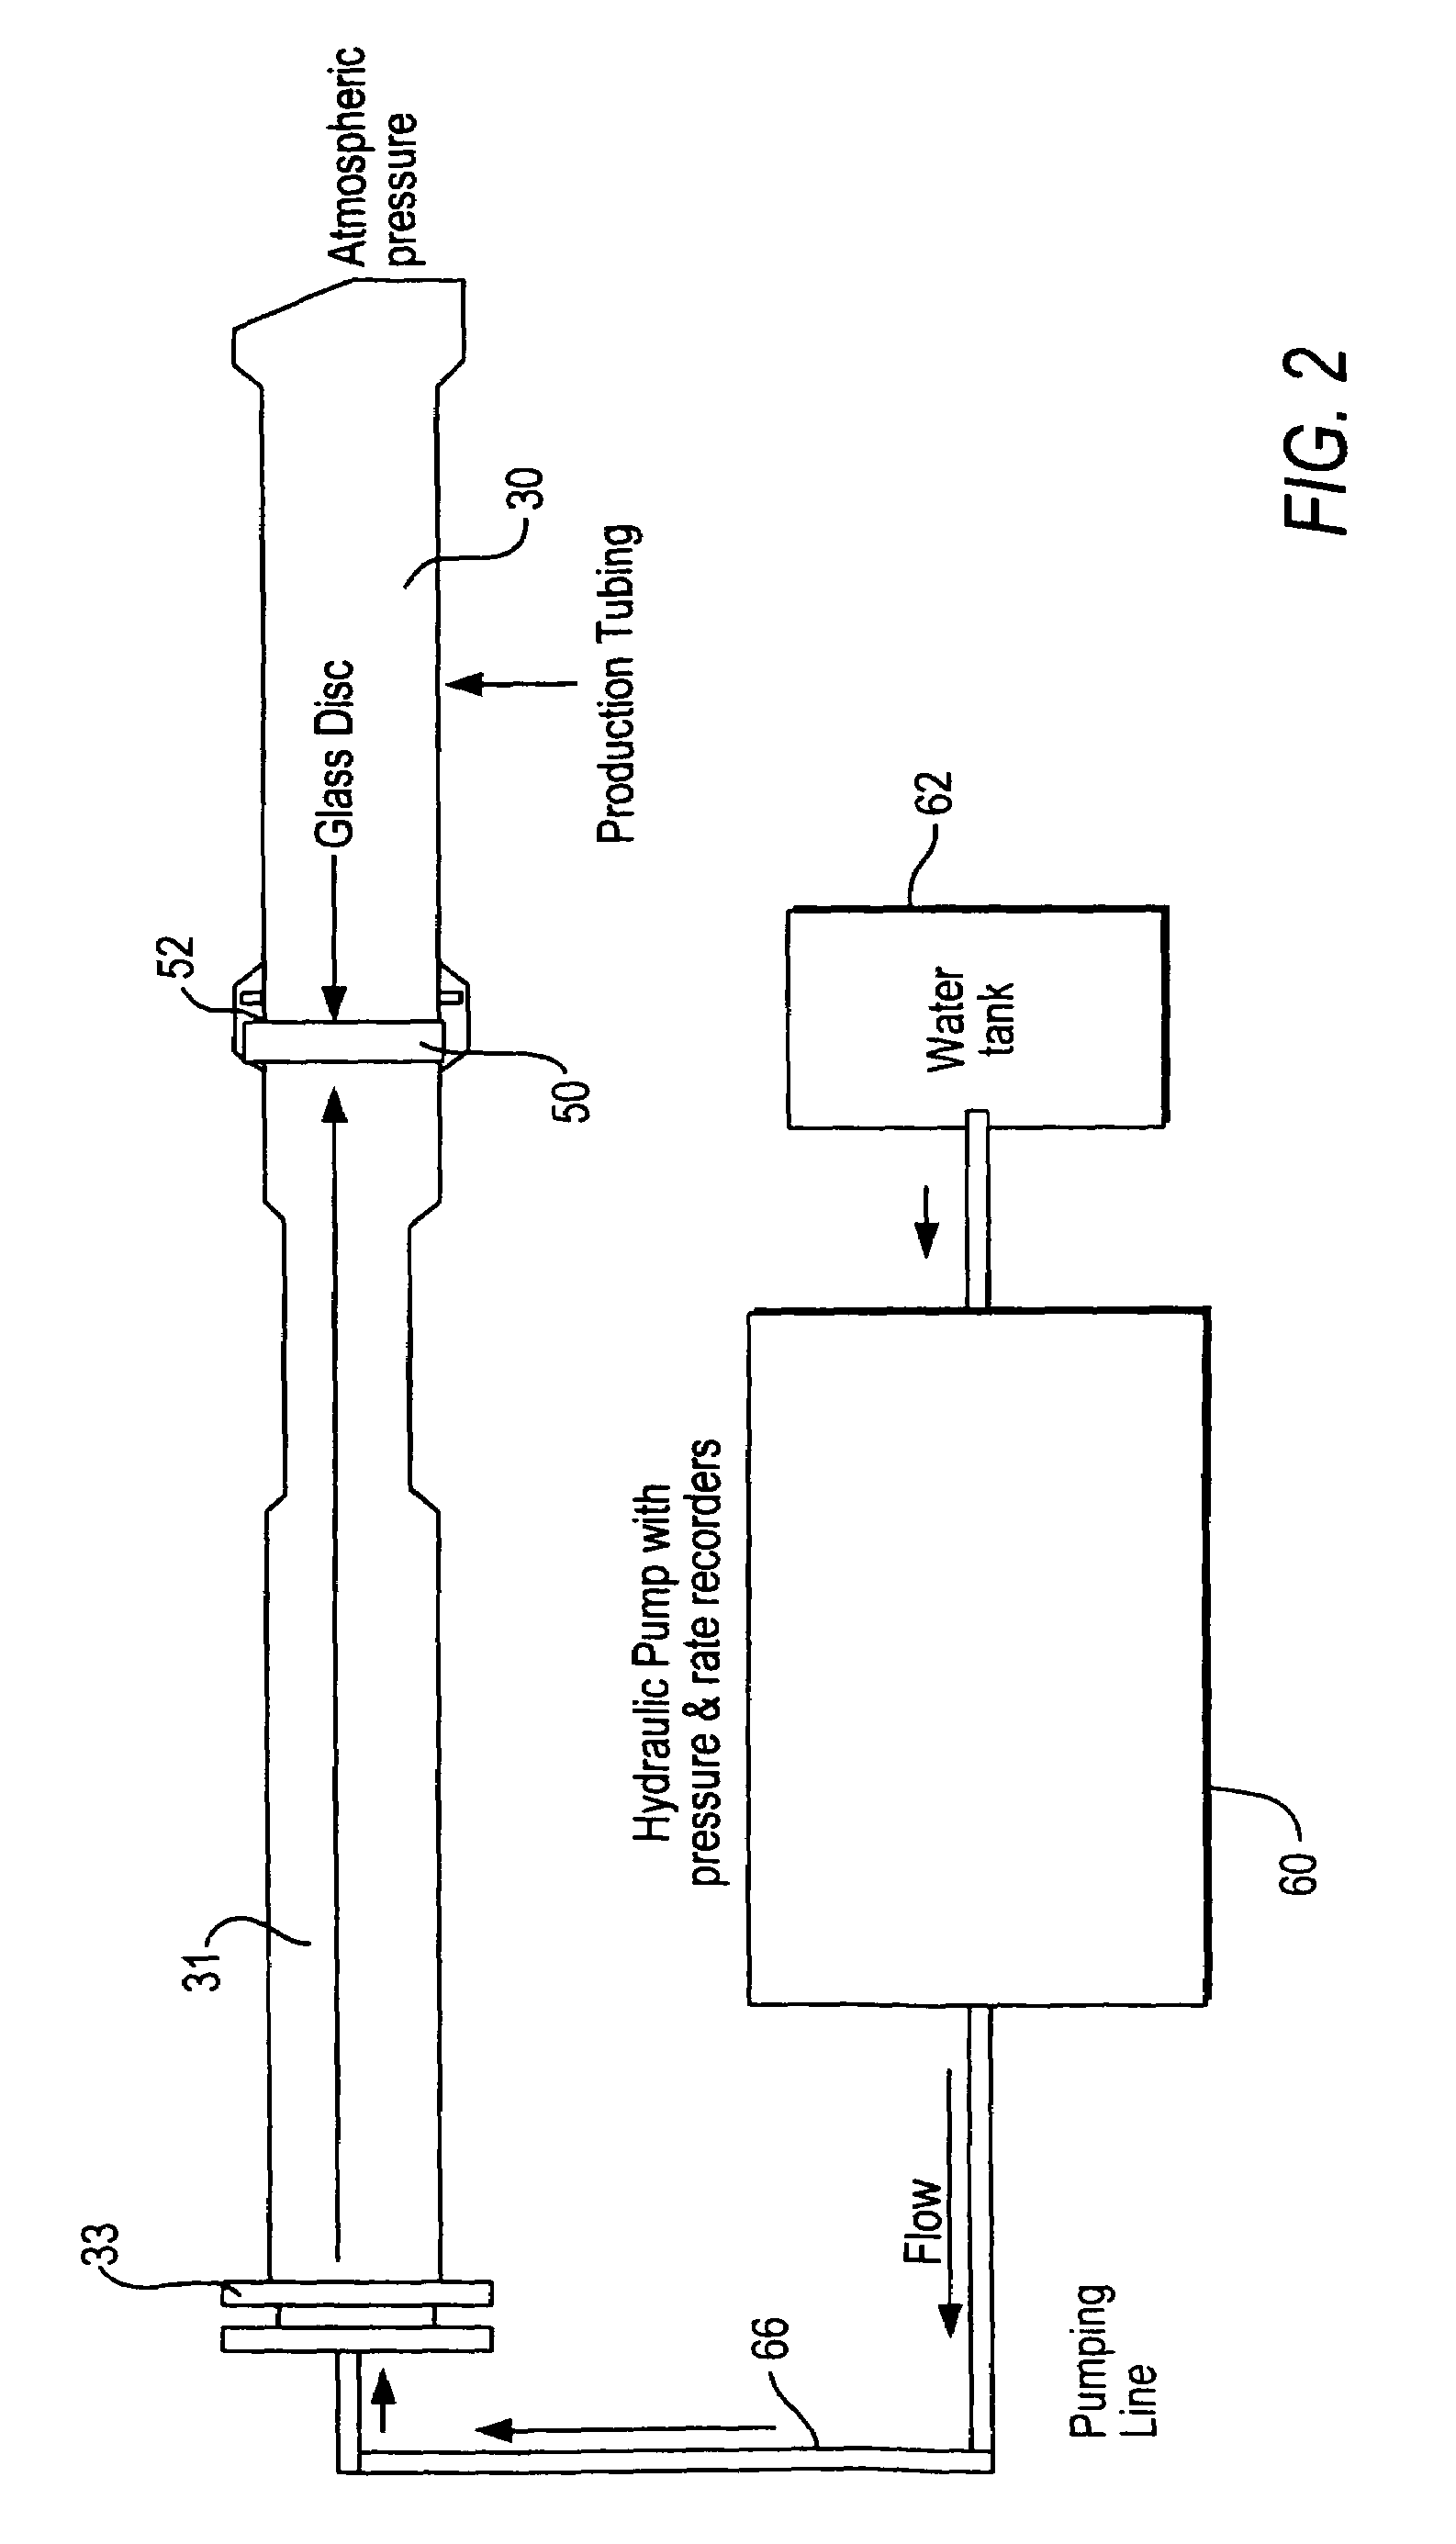 Method for hydraulic rupturing of downhole glass disc